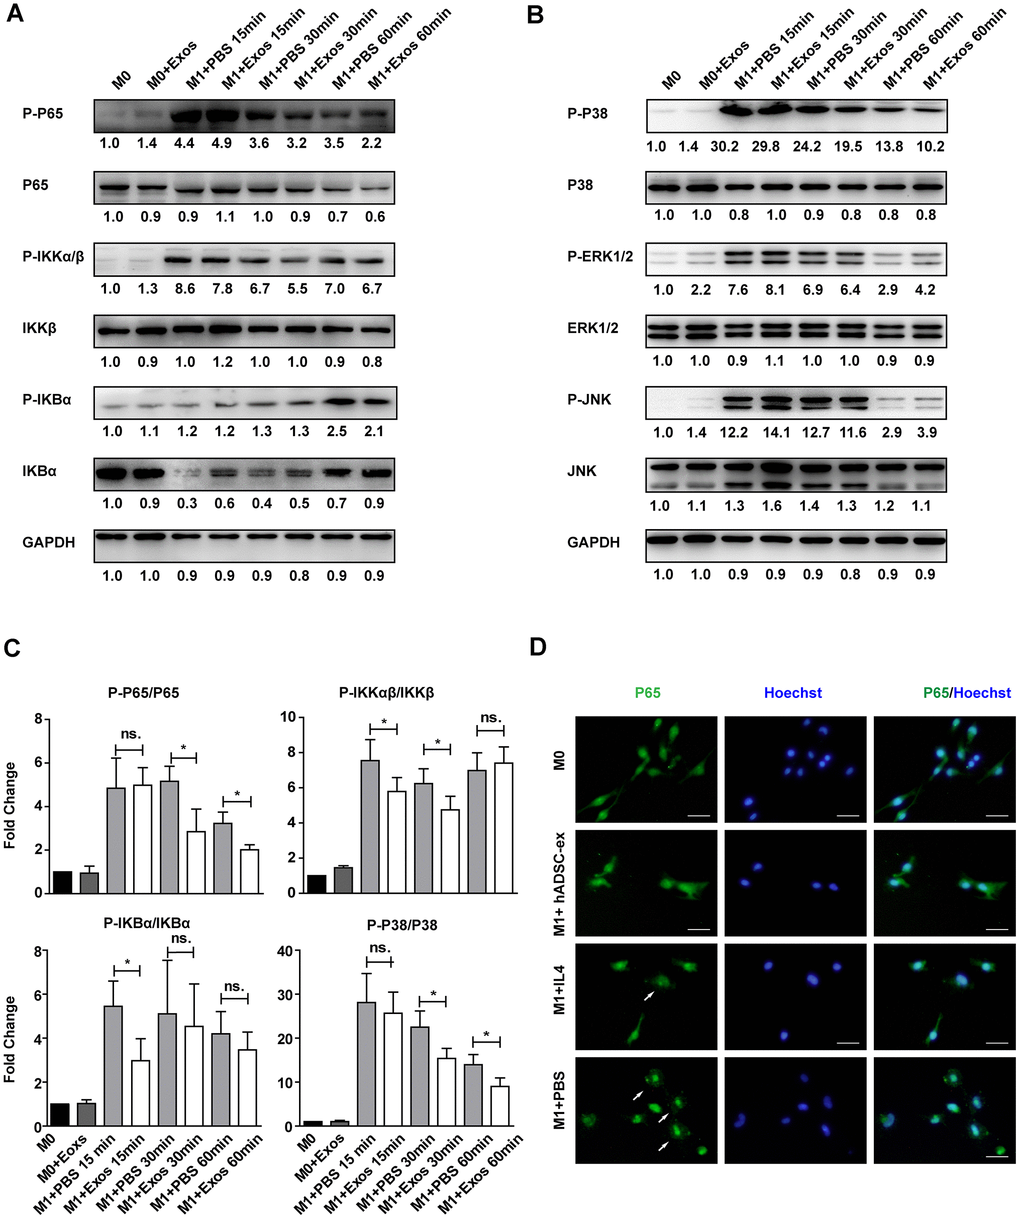 hADSC-ex suppressed the activation of classical NF-kB and MAPK signaling in primary microglia. (A, B) Immunoblots showing P-P65 and P65, P-IKKαβ and IKKβ, P-IKBα and IKBα, P-P38 and P38, P-ERK1/2 and ERK1/2, P-JNK and JNK, and GAPDH in M0 microglia cultured in M0 medium (containing 10 ng/mL M-CSF and 50 ng/mL transforming growth factor β1) or M1 medium, and treated with PBS or hADSC-ex (200 μg/mL) at different time points. (C) Fold changes in P-P65 to P65, P-IKKαβ to IKKβ, P-IKBα to IKBα, and P-P38 to P38 levels were each normalized to those of the M0 control group. Data represent the mean ± SD, n = 3 independent experiments, ns. p > 0.05, * p D) M0 microglia were cultured in M1 medium and treated with PBS, IL-4 (10 ng/mL) or hADSC-ex (200 μg/mL) for 24 h. The cells were stained for NF-κB P65 protein (green), and the nuclei were counterstained with Hoechst 33342 (blue). Scale bar = 50 μm. White arrows indicate the enrichment of nuclear NF-κB P65.